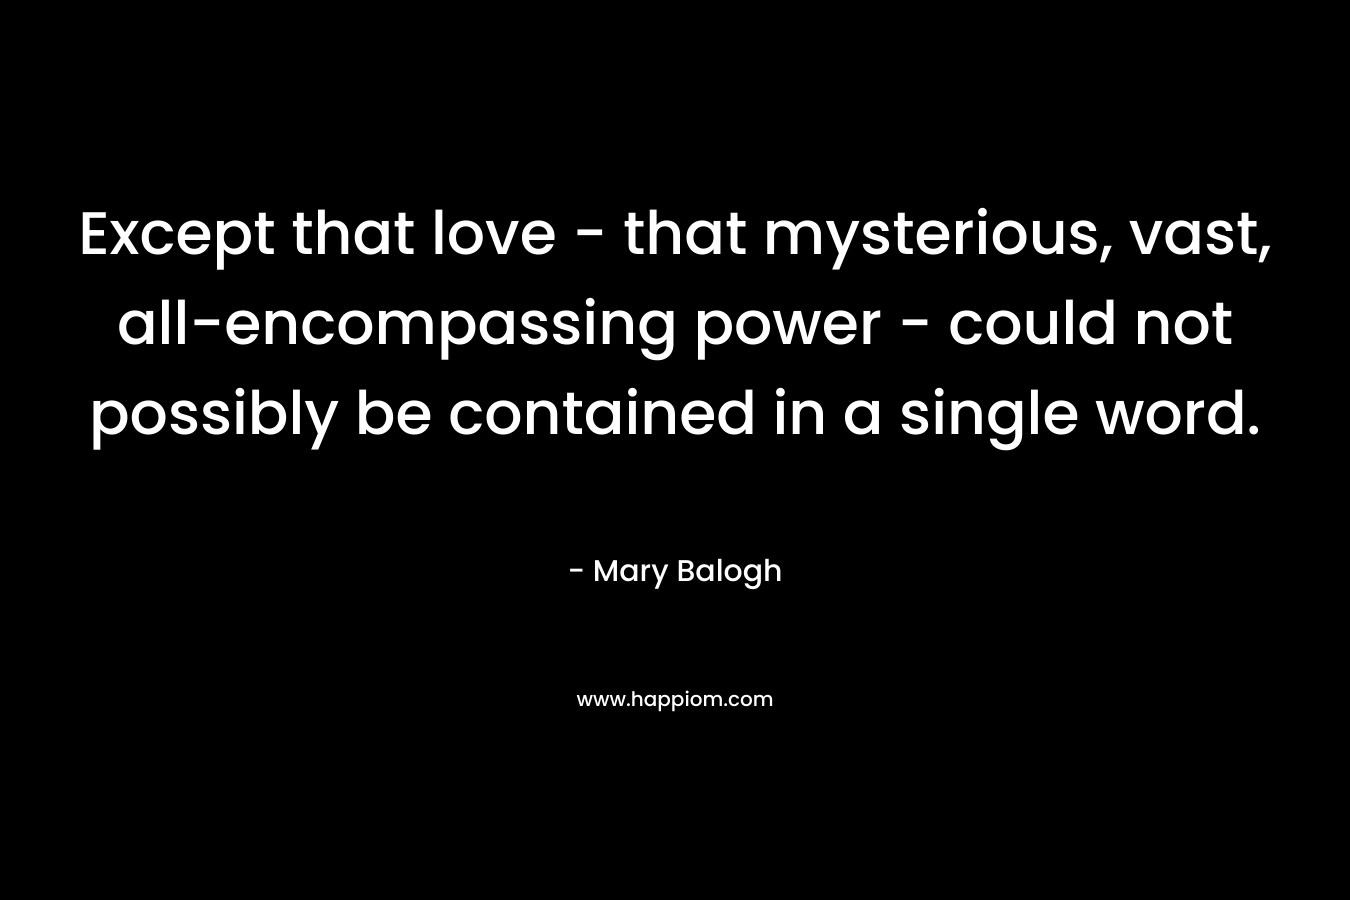 Except that love – that mysterious, vast, all-encompassing power – could not possibly be contained in a single word. – Mary Balogh